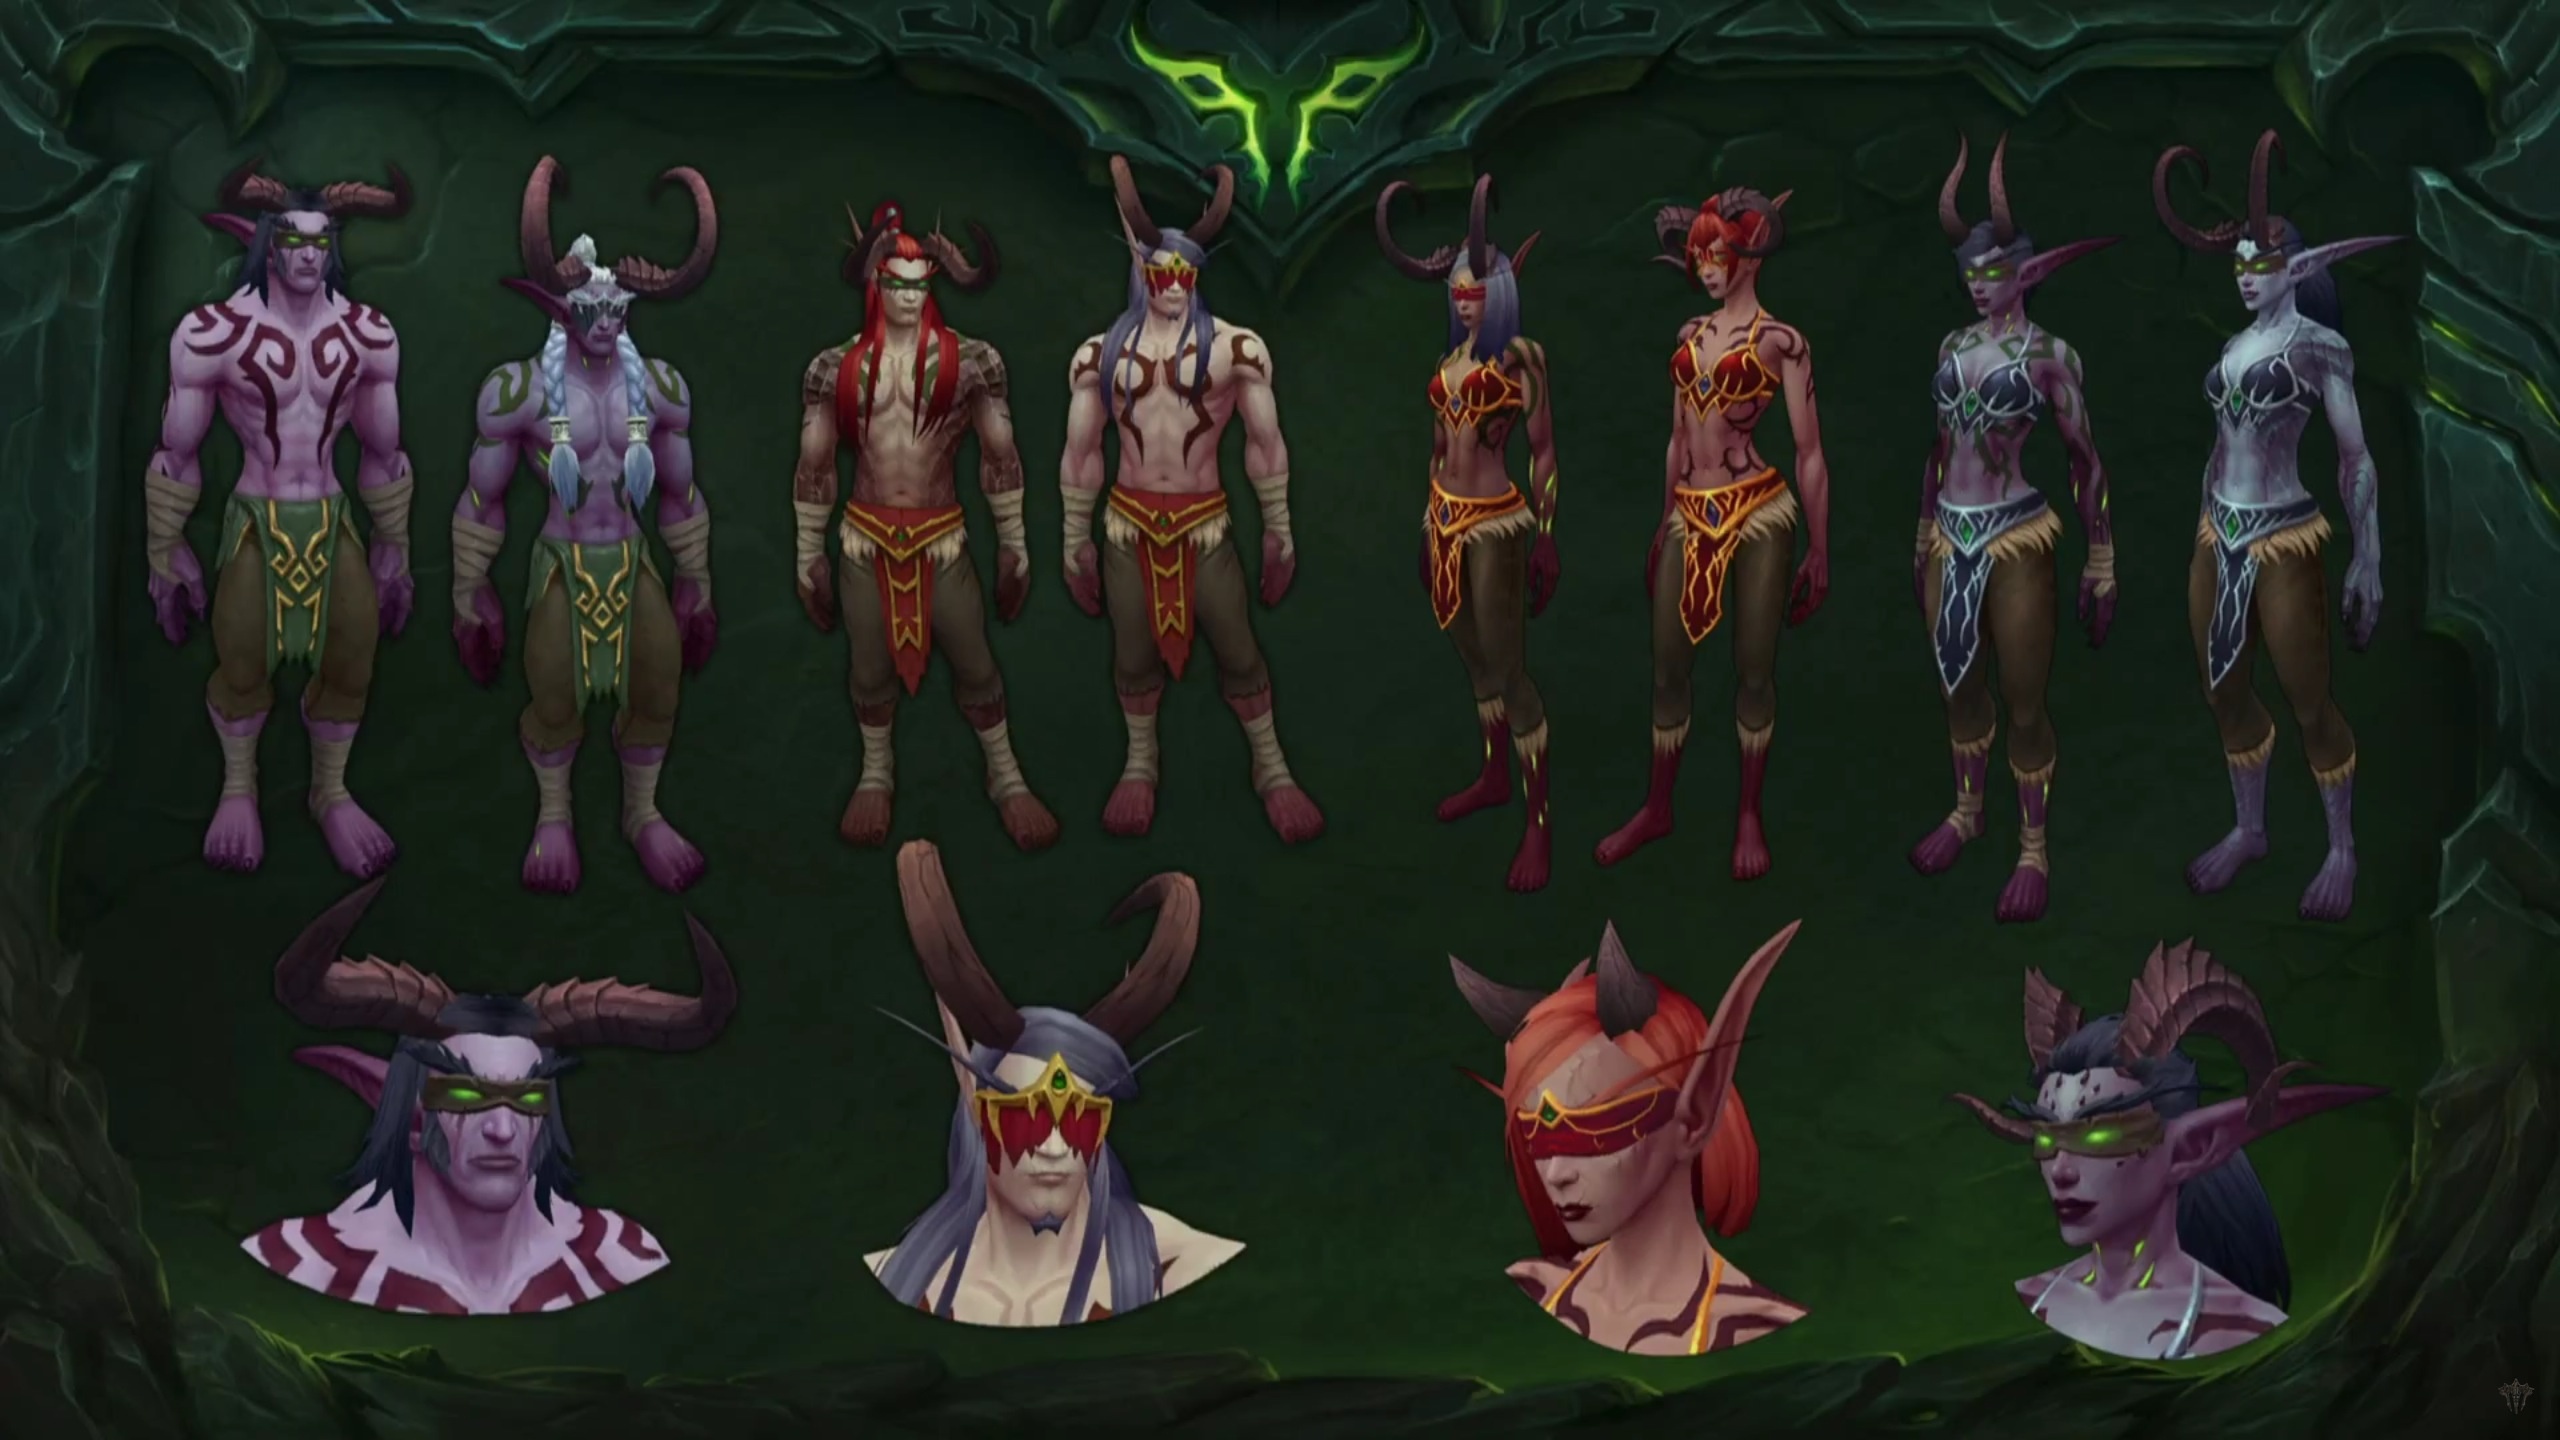 What’s Up With World Of Warcraft’s New Double-Jumping Fetish Elves